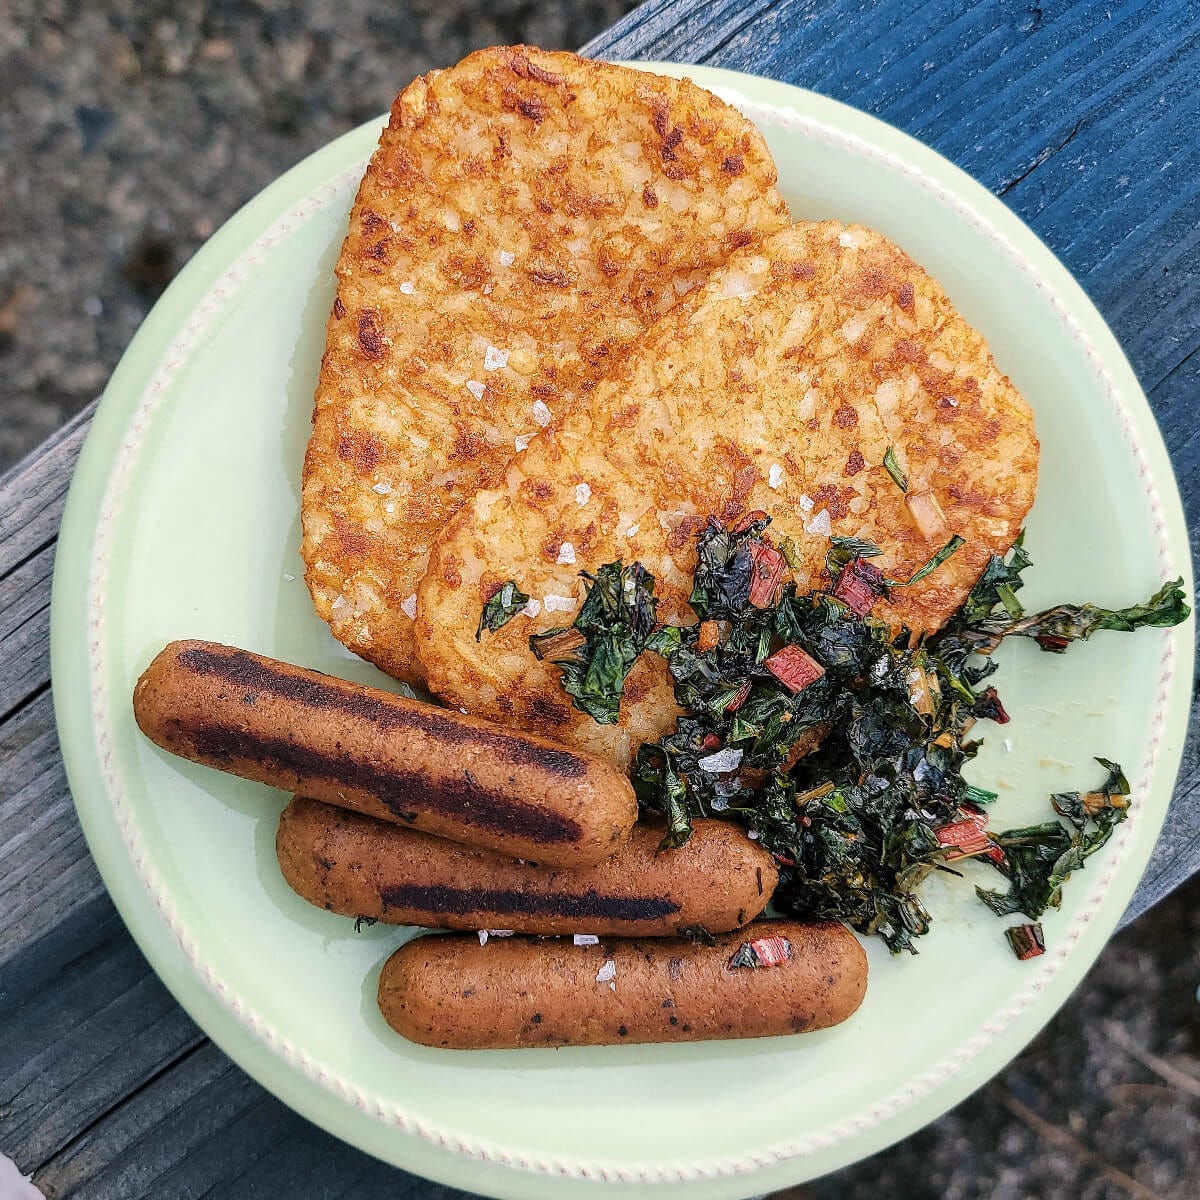 two crispy, golden hashbrowns patties cozied up beneath three, charred veggie sausage links and a small wilted collection of rainbow chard. sprinkled over top of everything is that darn flaky sea salt.